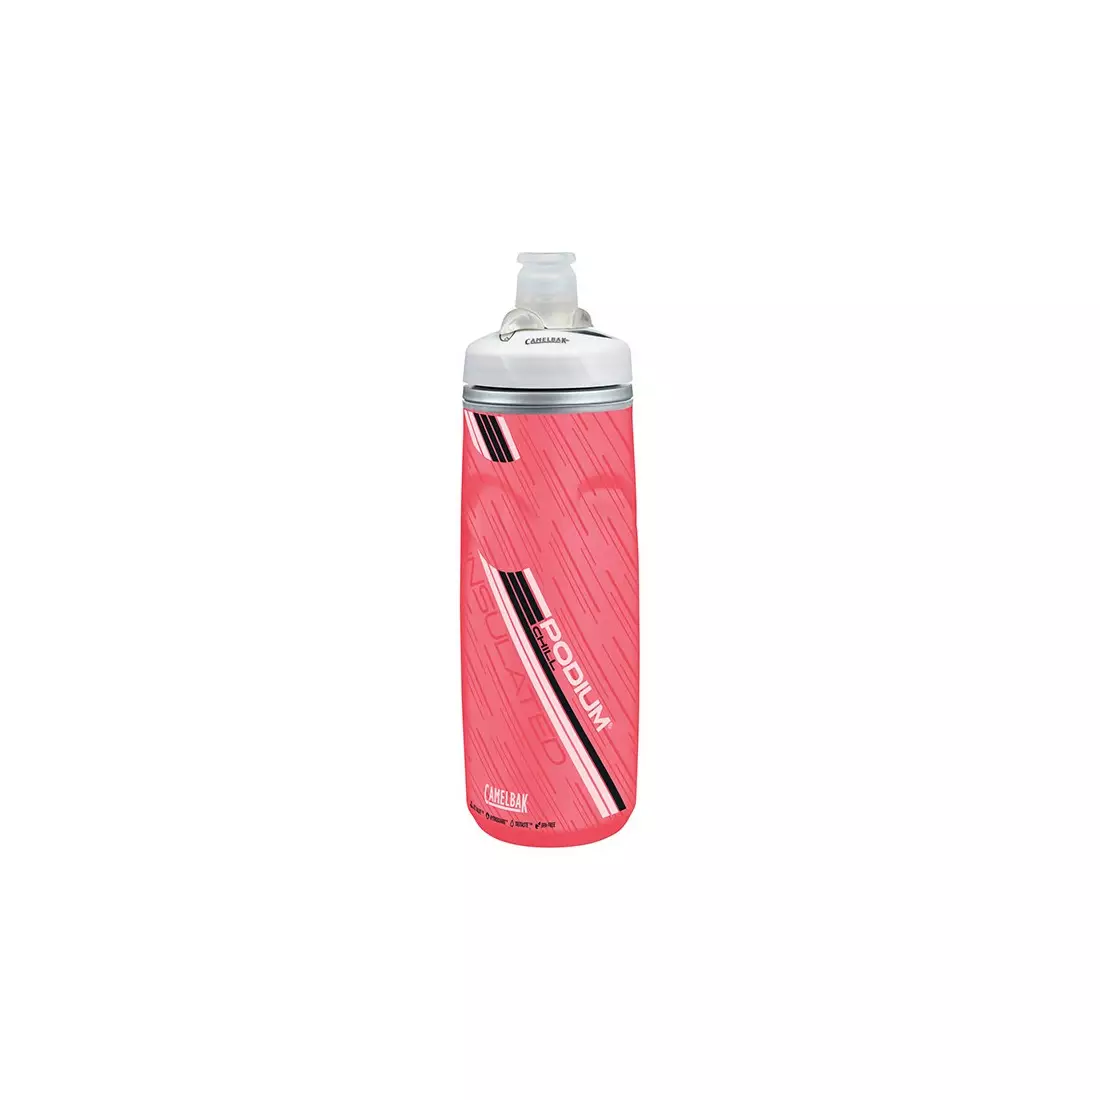 Camelbak SS18 Podium Chill Thermal Cycling Water Bottle 21oz / 620ml Power Pink